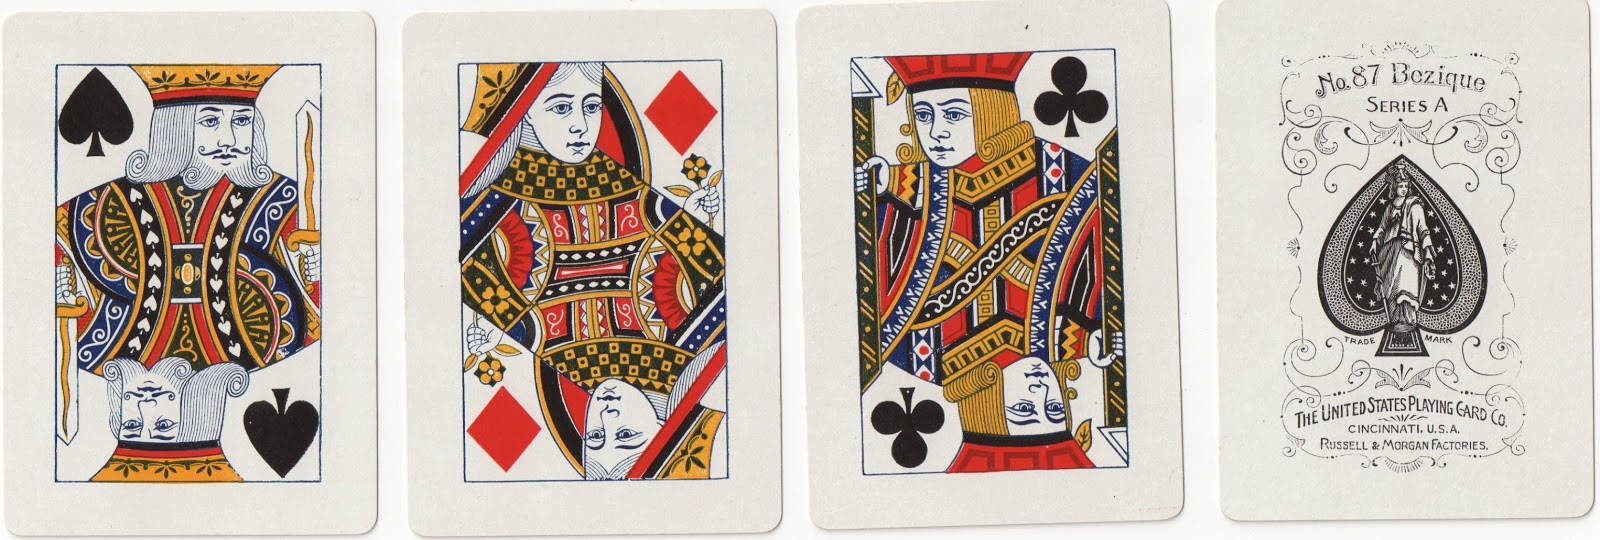 Bezique Playing Cards on Table Wallpaper